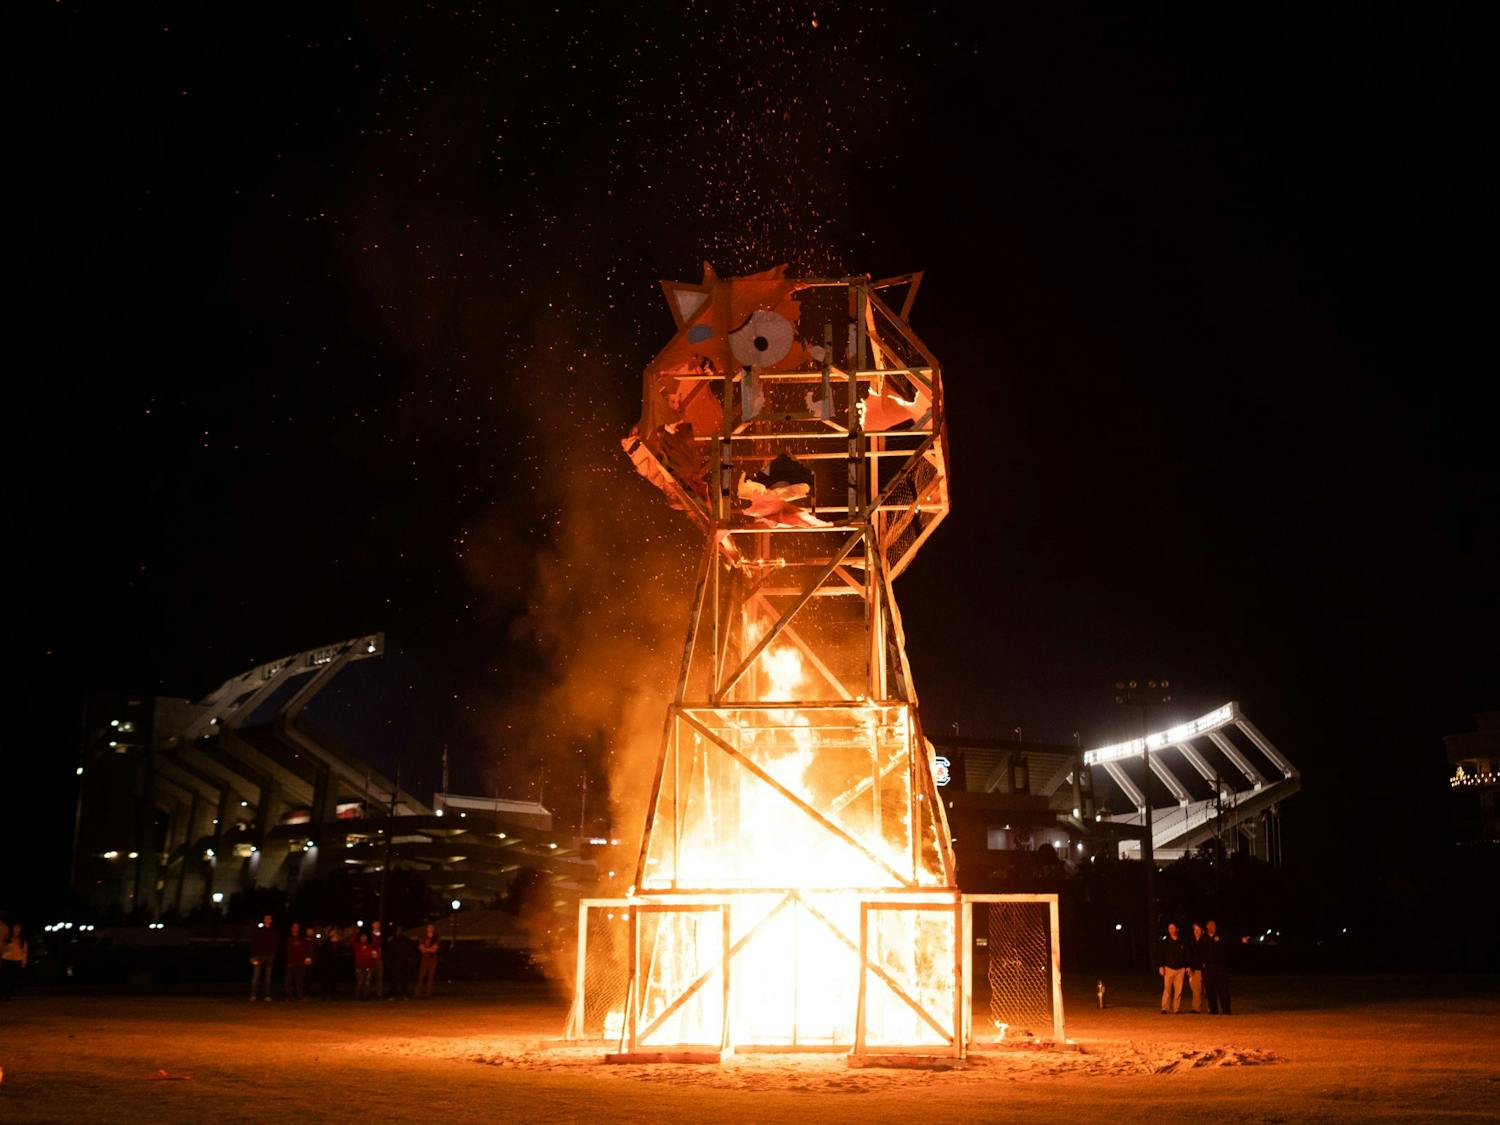 The Tiger Burn, a tradition of the Carolina versus Clemson Rivalry, returned this year. The South Carolina Gamecocks are set play the Clemson Tigers on Nov. 27, 2021 at 7:30 p.m. at Williams-Brice Stadium.&nbsp;